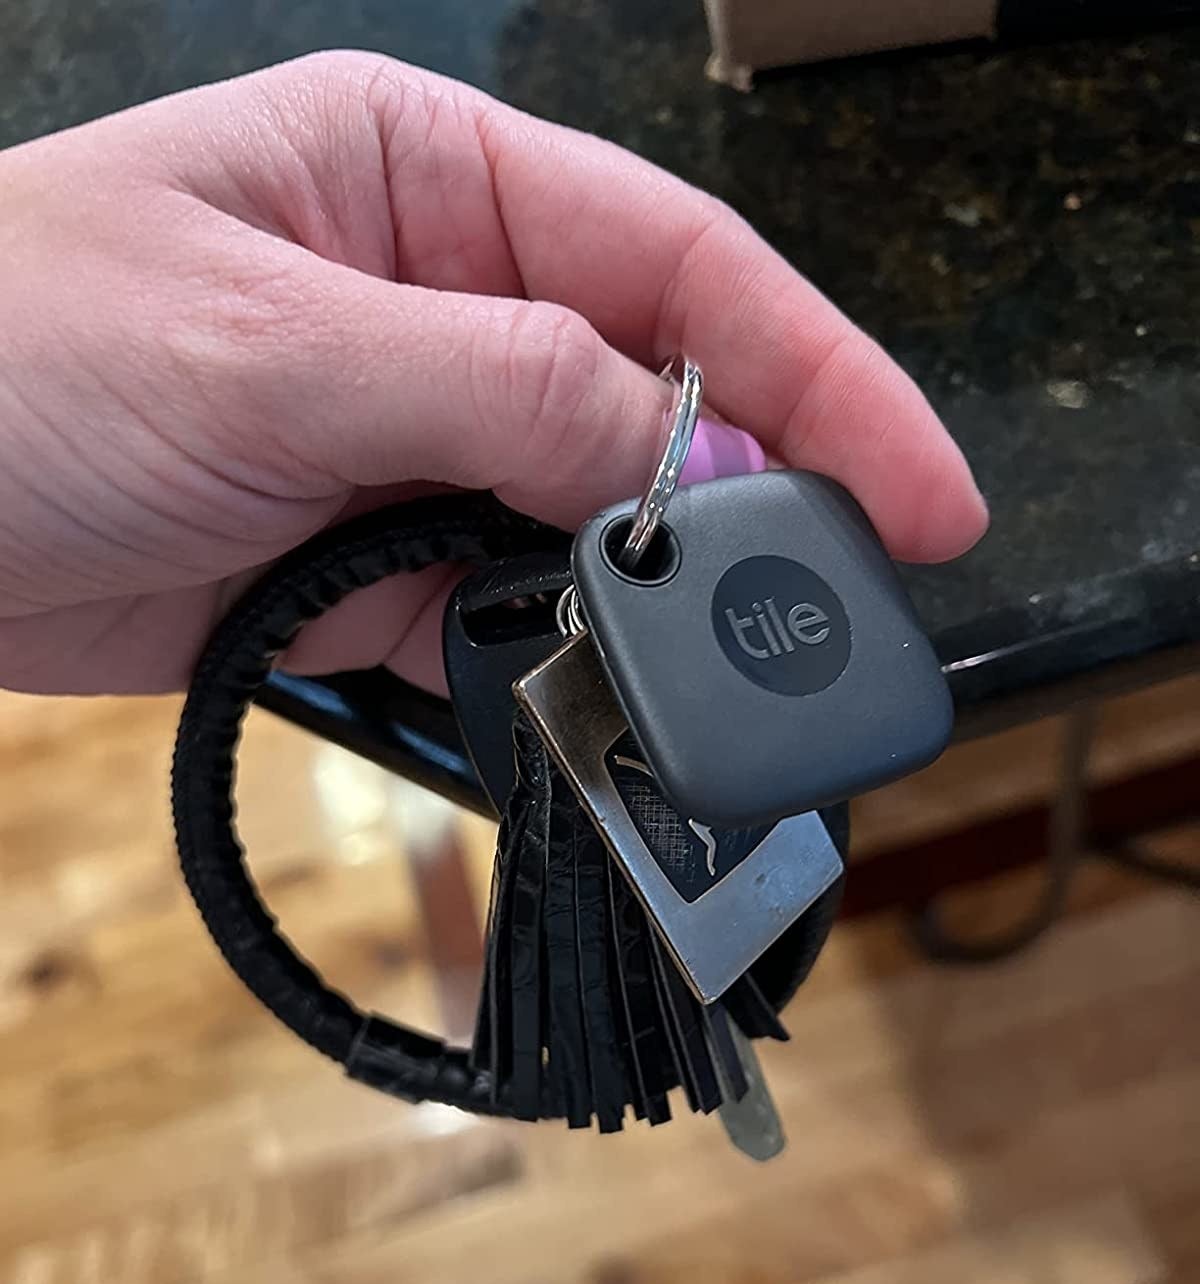 the black square tracker on a keychain